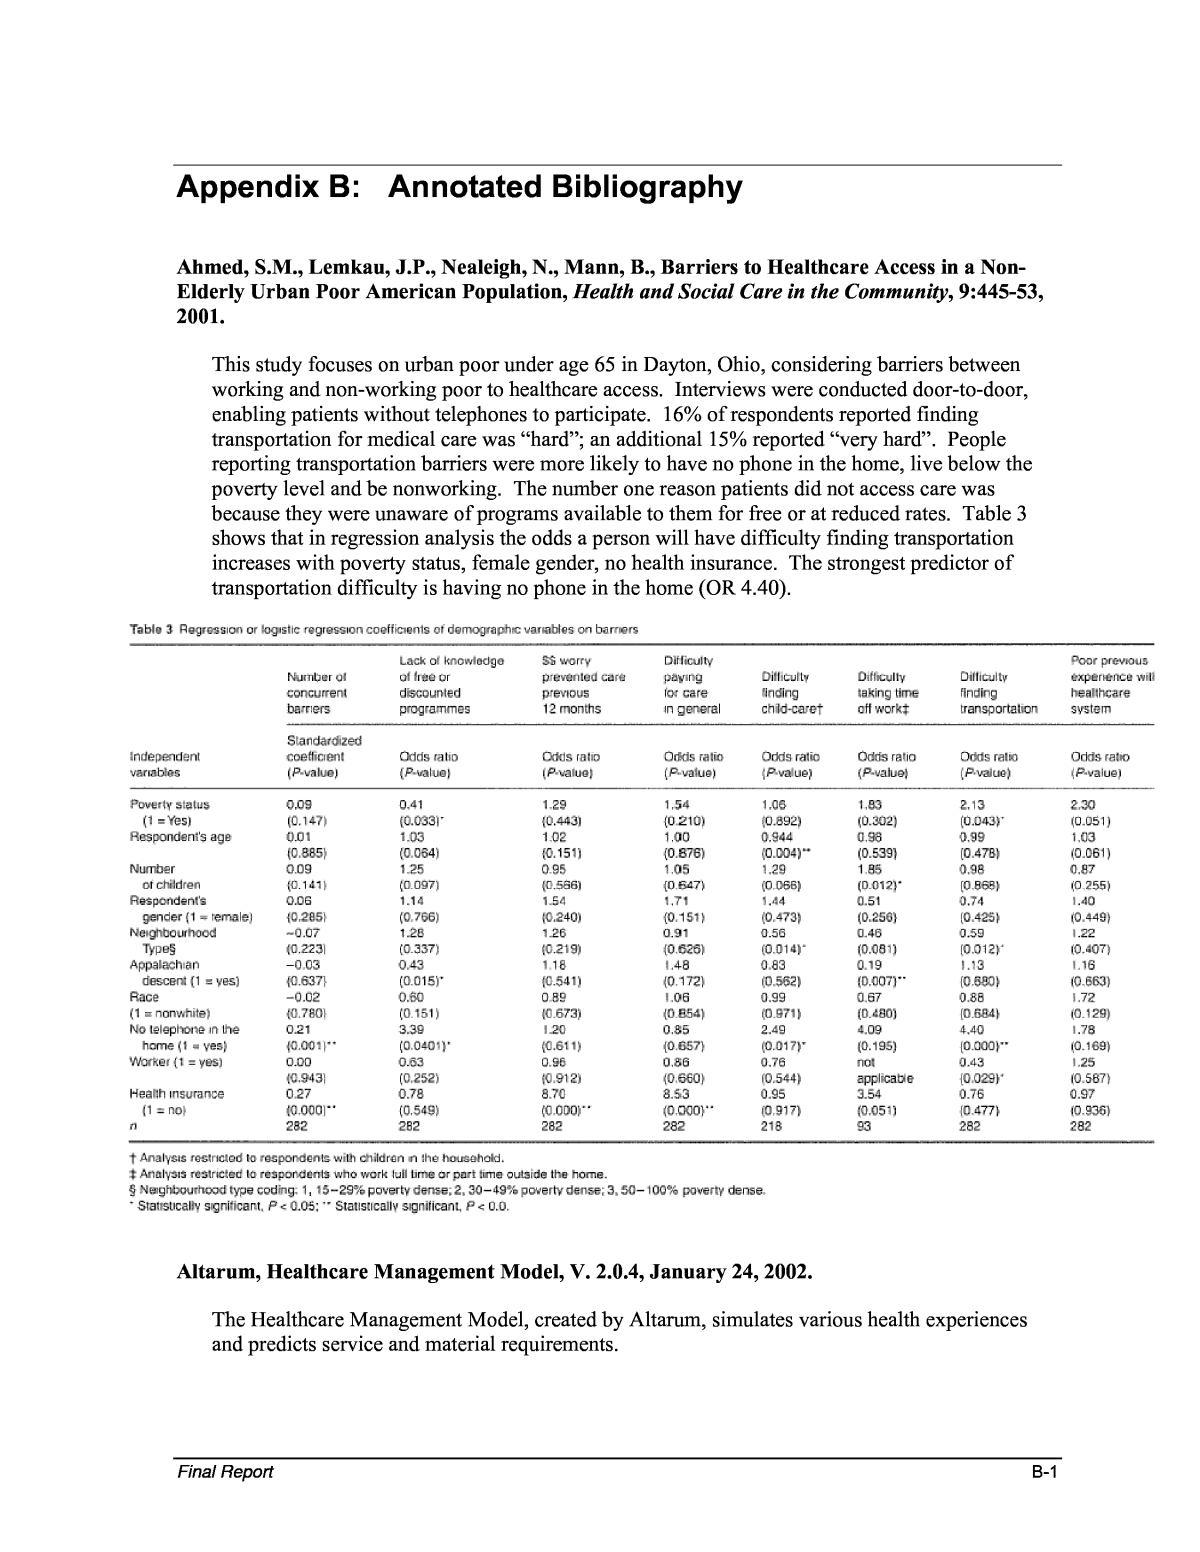 Appendix B Annotated Bibliography Cost-Benefit Analysis of Providing Non-Emergency Medical Transportation The National Academies Press picture picture